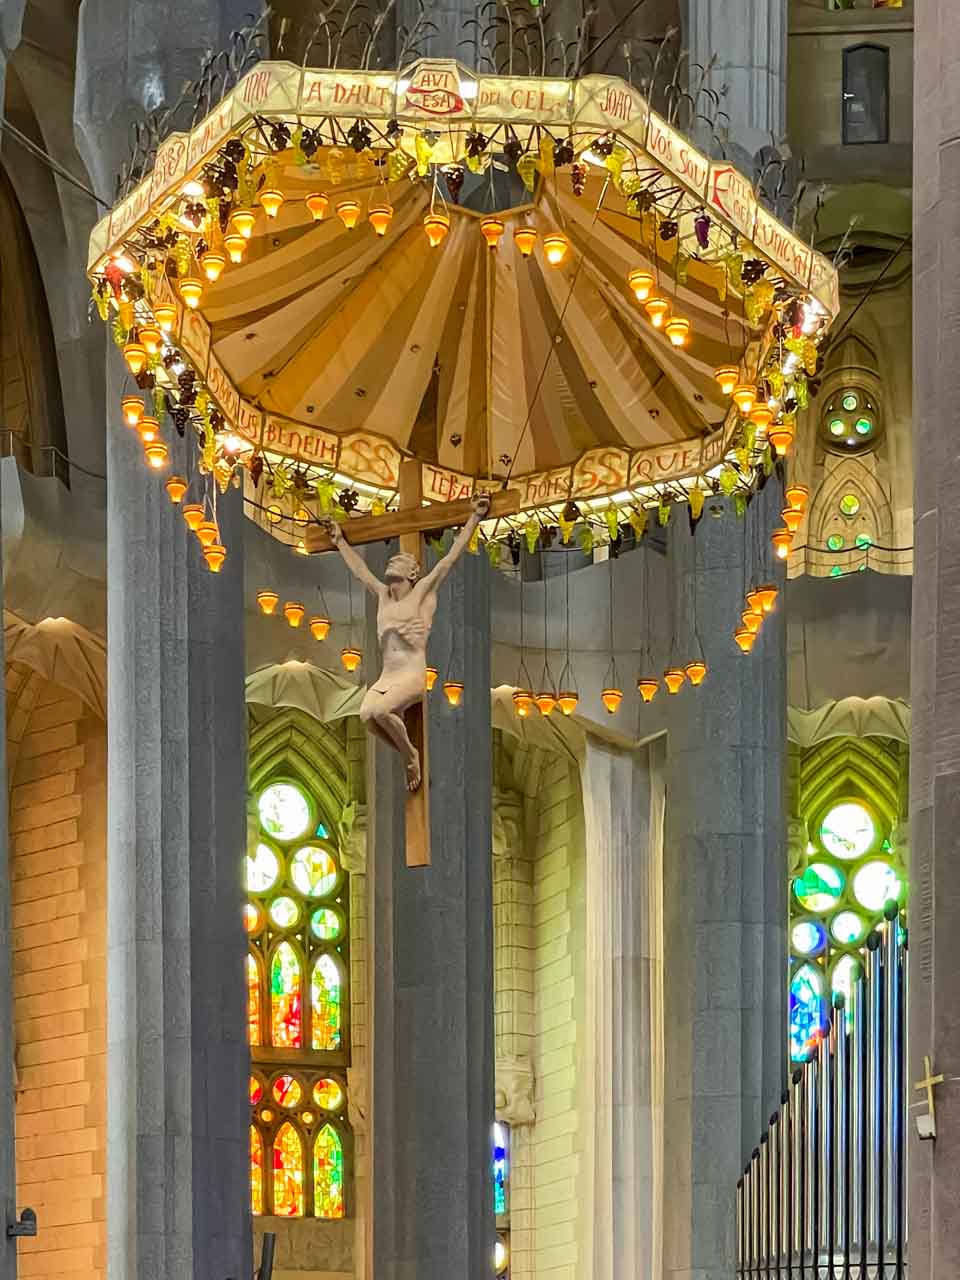 A statue of Jesus on a cross underneath an umbrella hangs fro the ceiling of a church. Grey marble columns and stained glass windows feature below the sculture of Jesus.